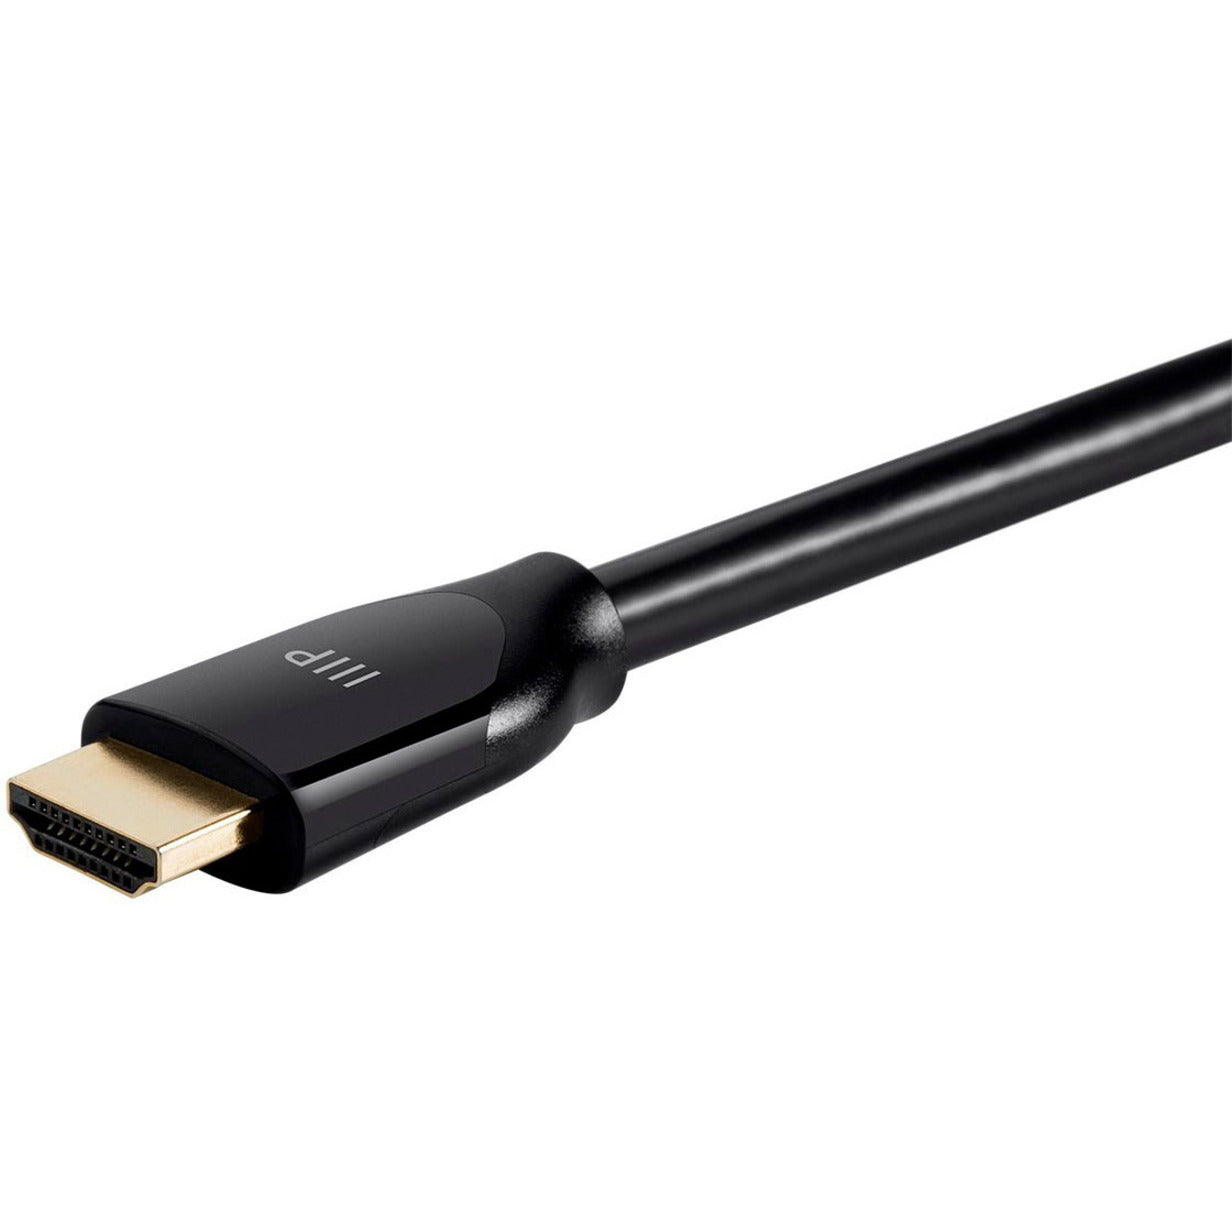 Monoprice 15429 Certified Premium High Speed HDMI Cable, HDR, 10ft Black - 18 Gbit/s Data Transfer Rate, 3840 x 2160 Supported Resolution